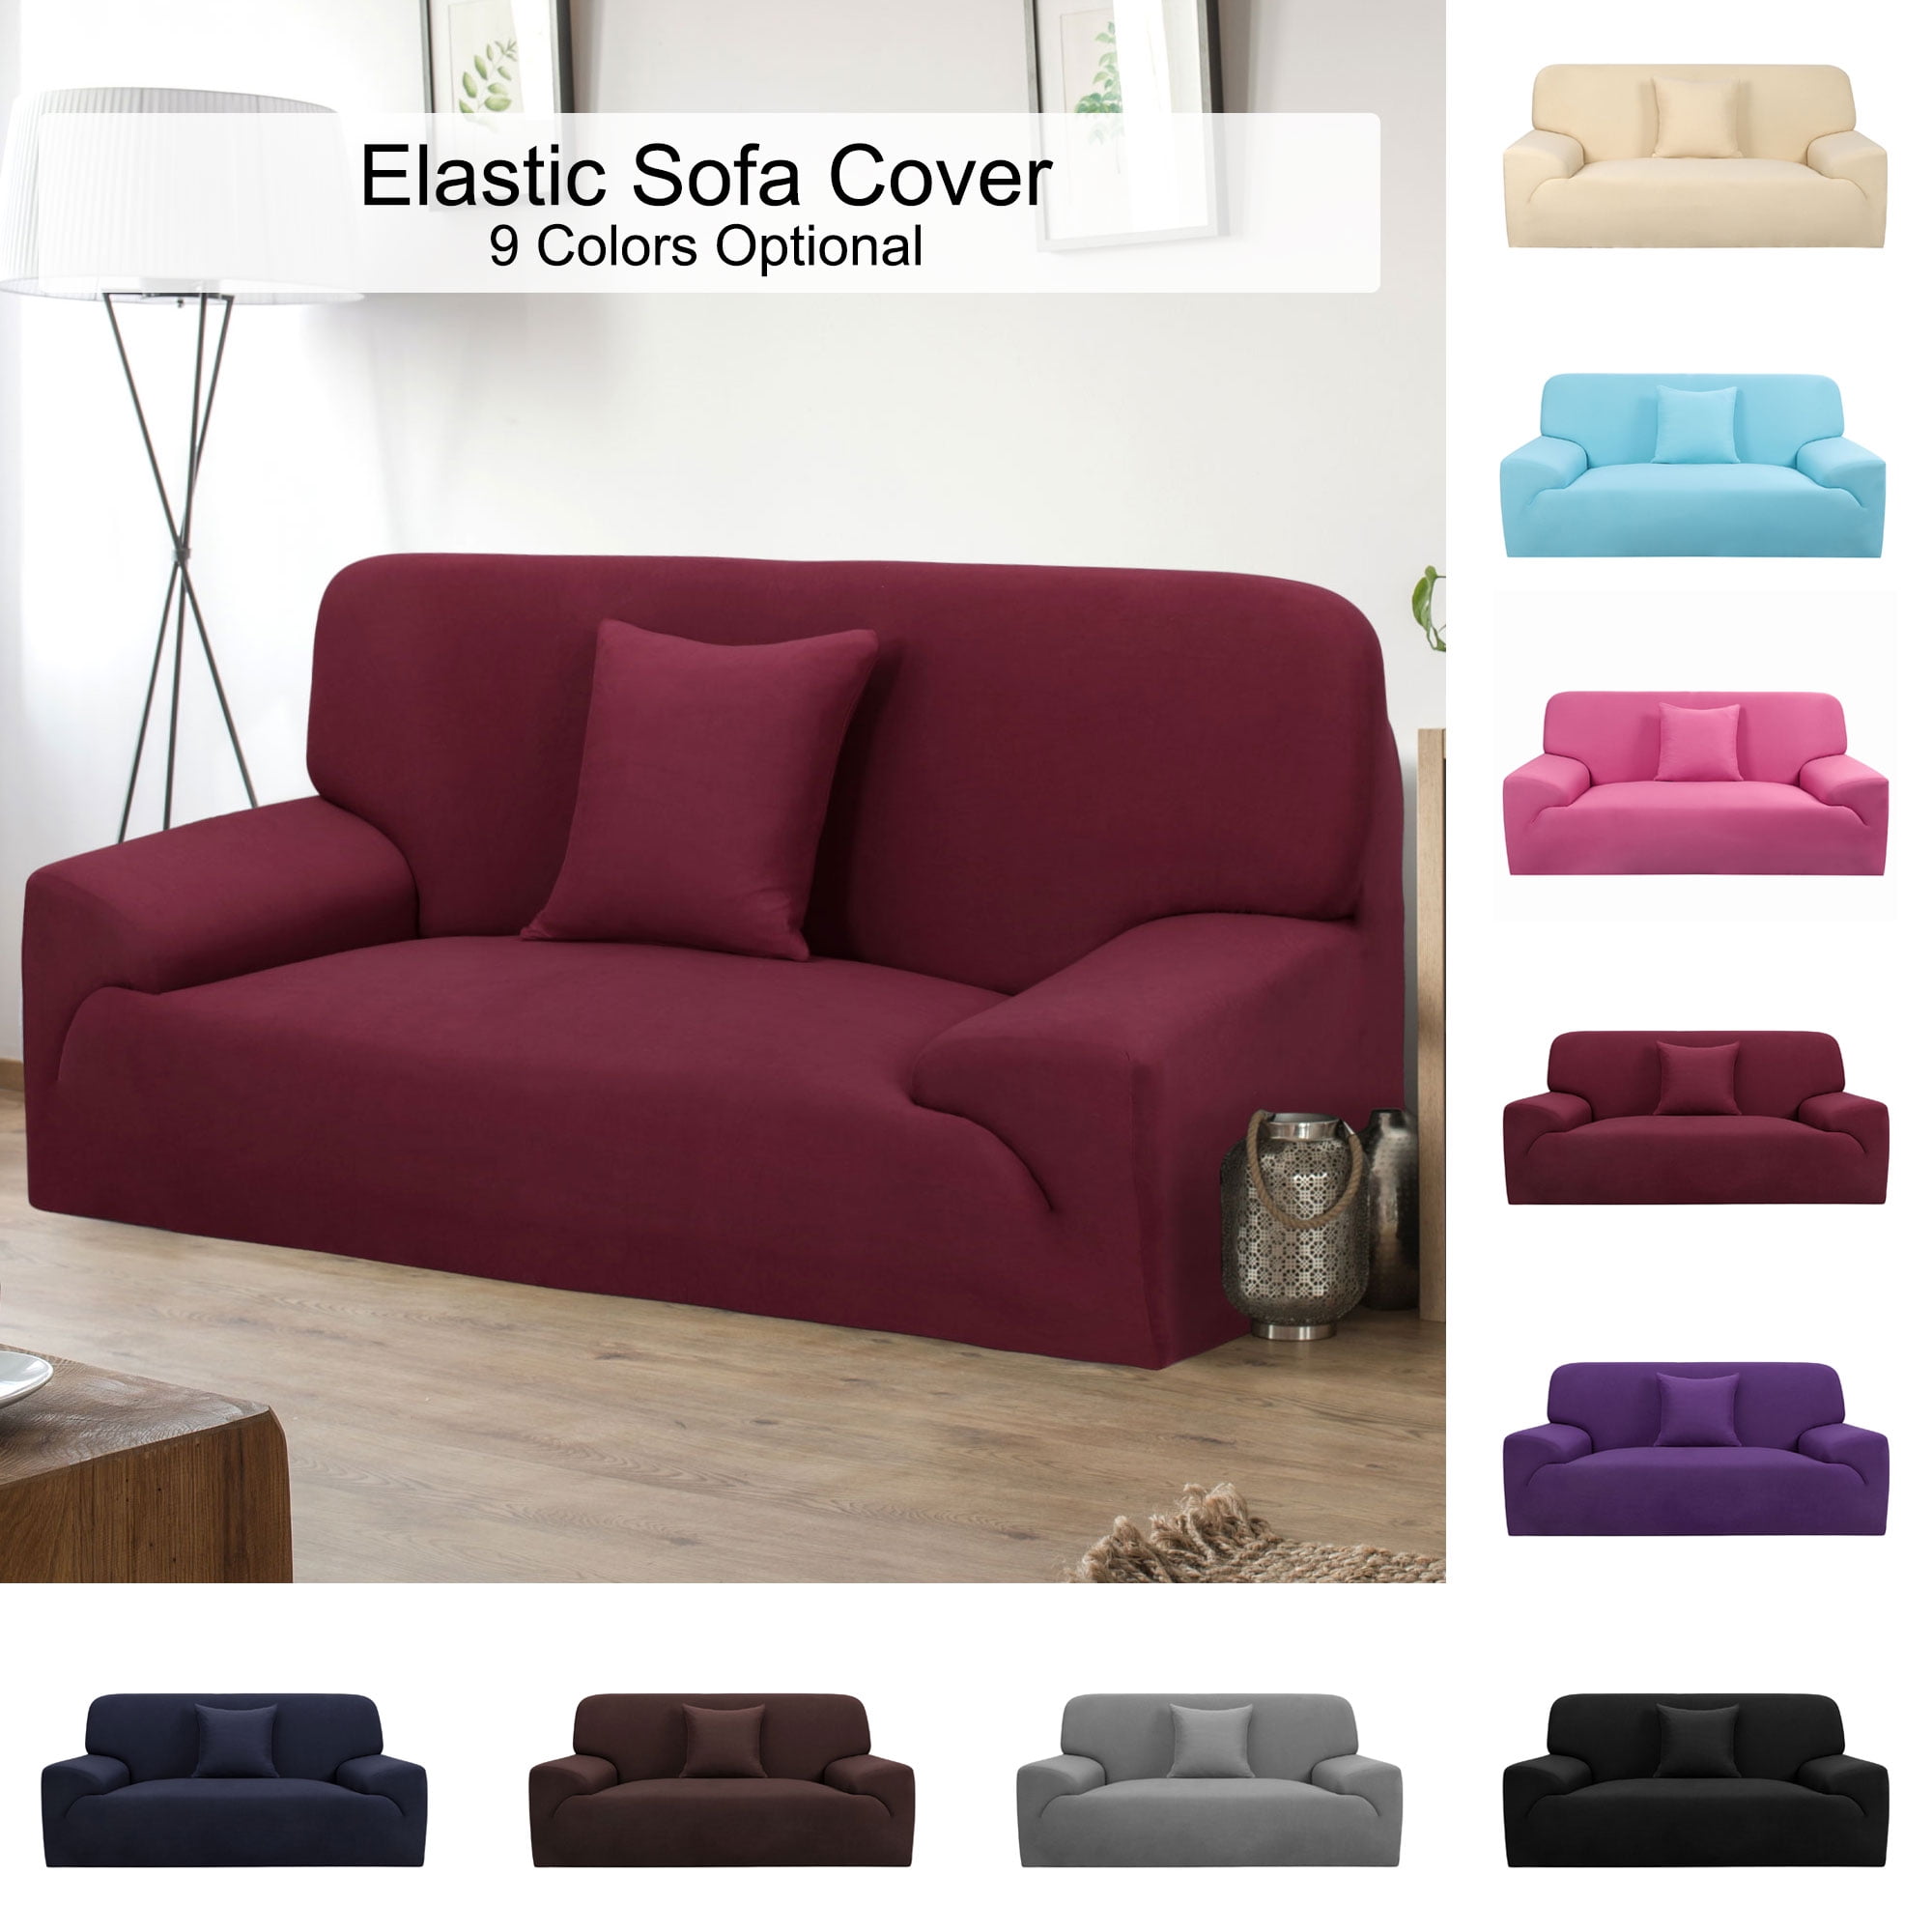 Details about   1/2/3/4 Seater Stretch Sofa Settee Couch Covers Solid Color Elastic Slipcovers 